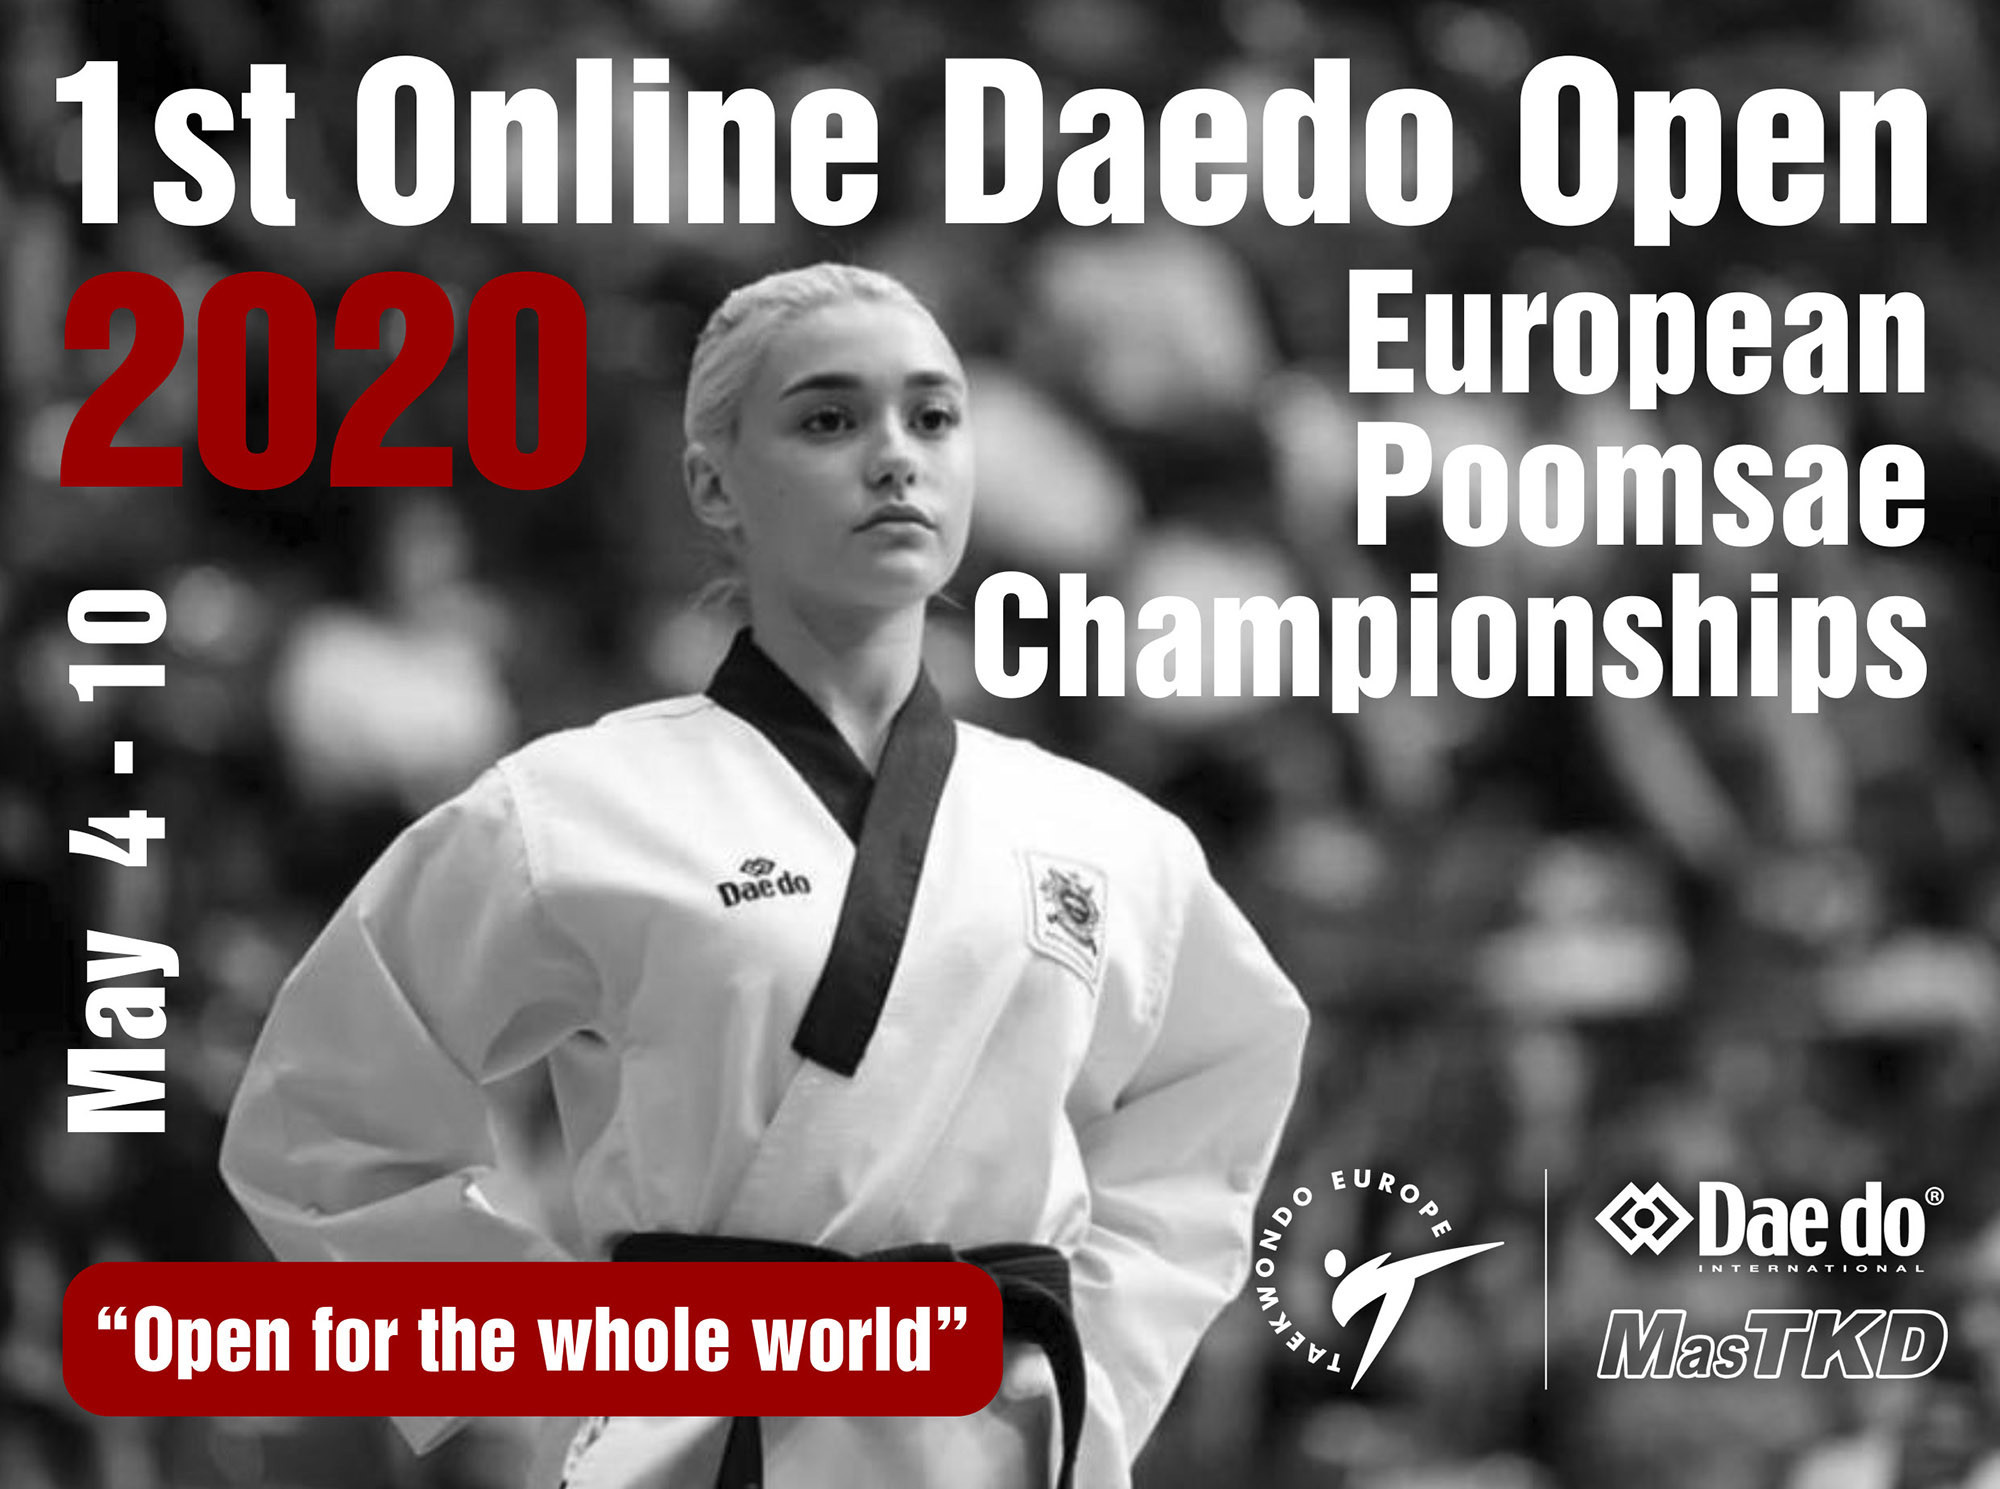 The online Open Poomsae Championships will take place from May 4 to 10